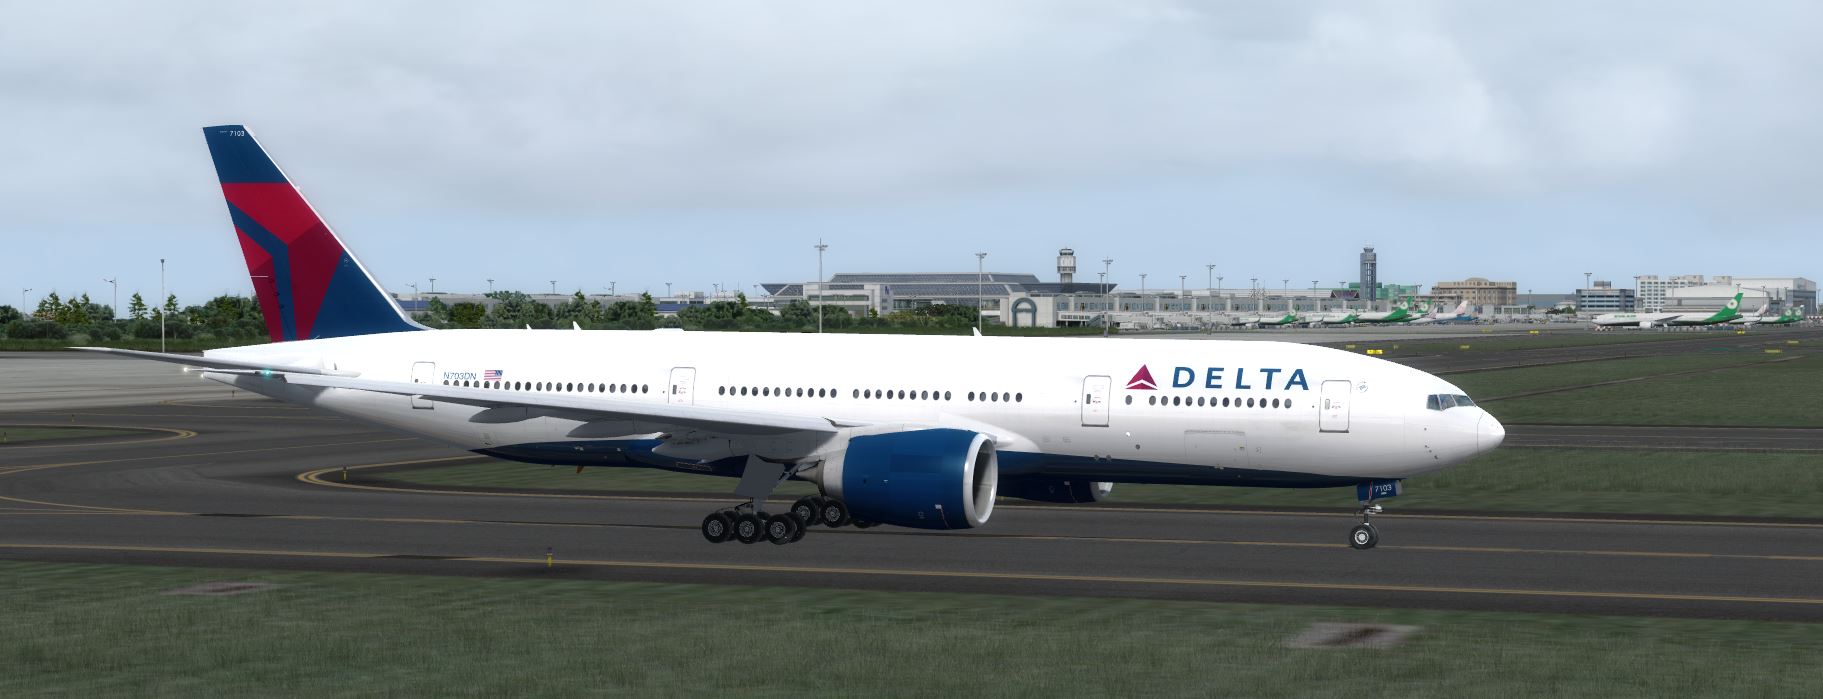 B777-200 Delta Airlines Standard Livery-604 